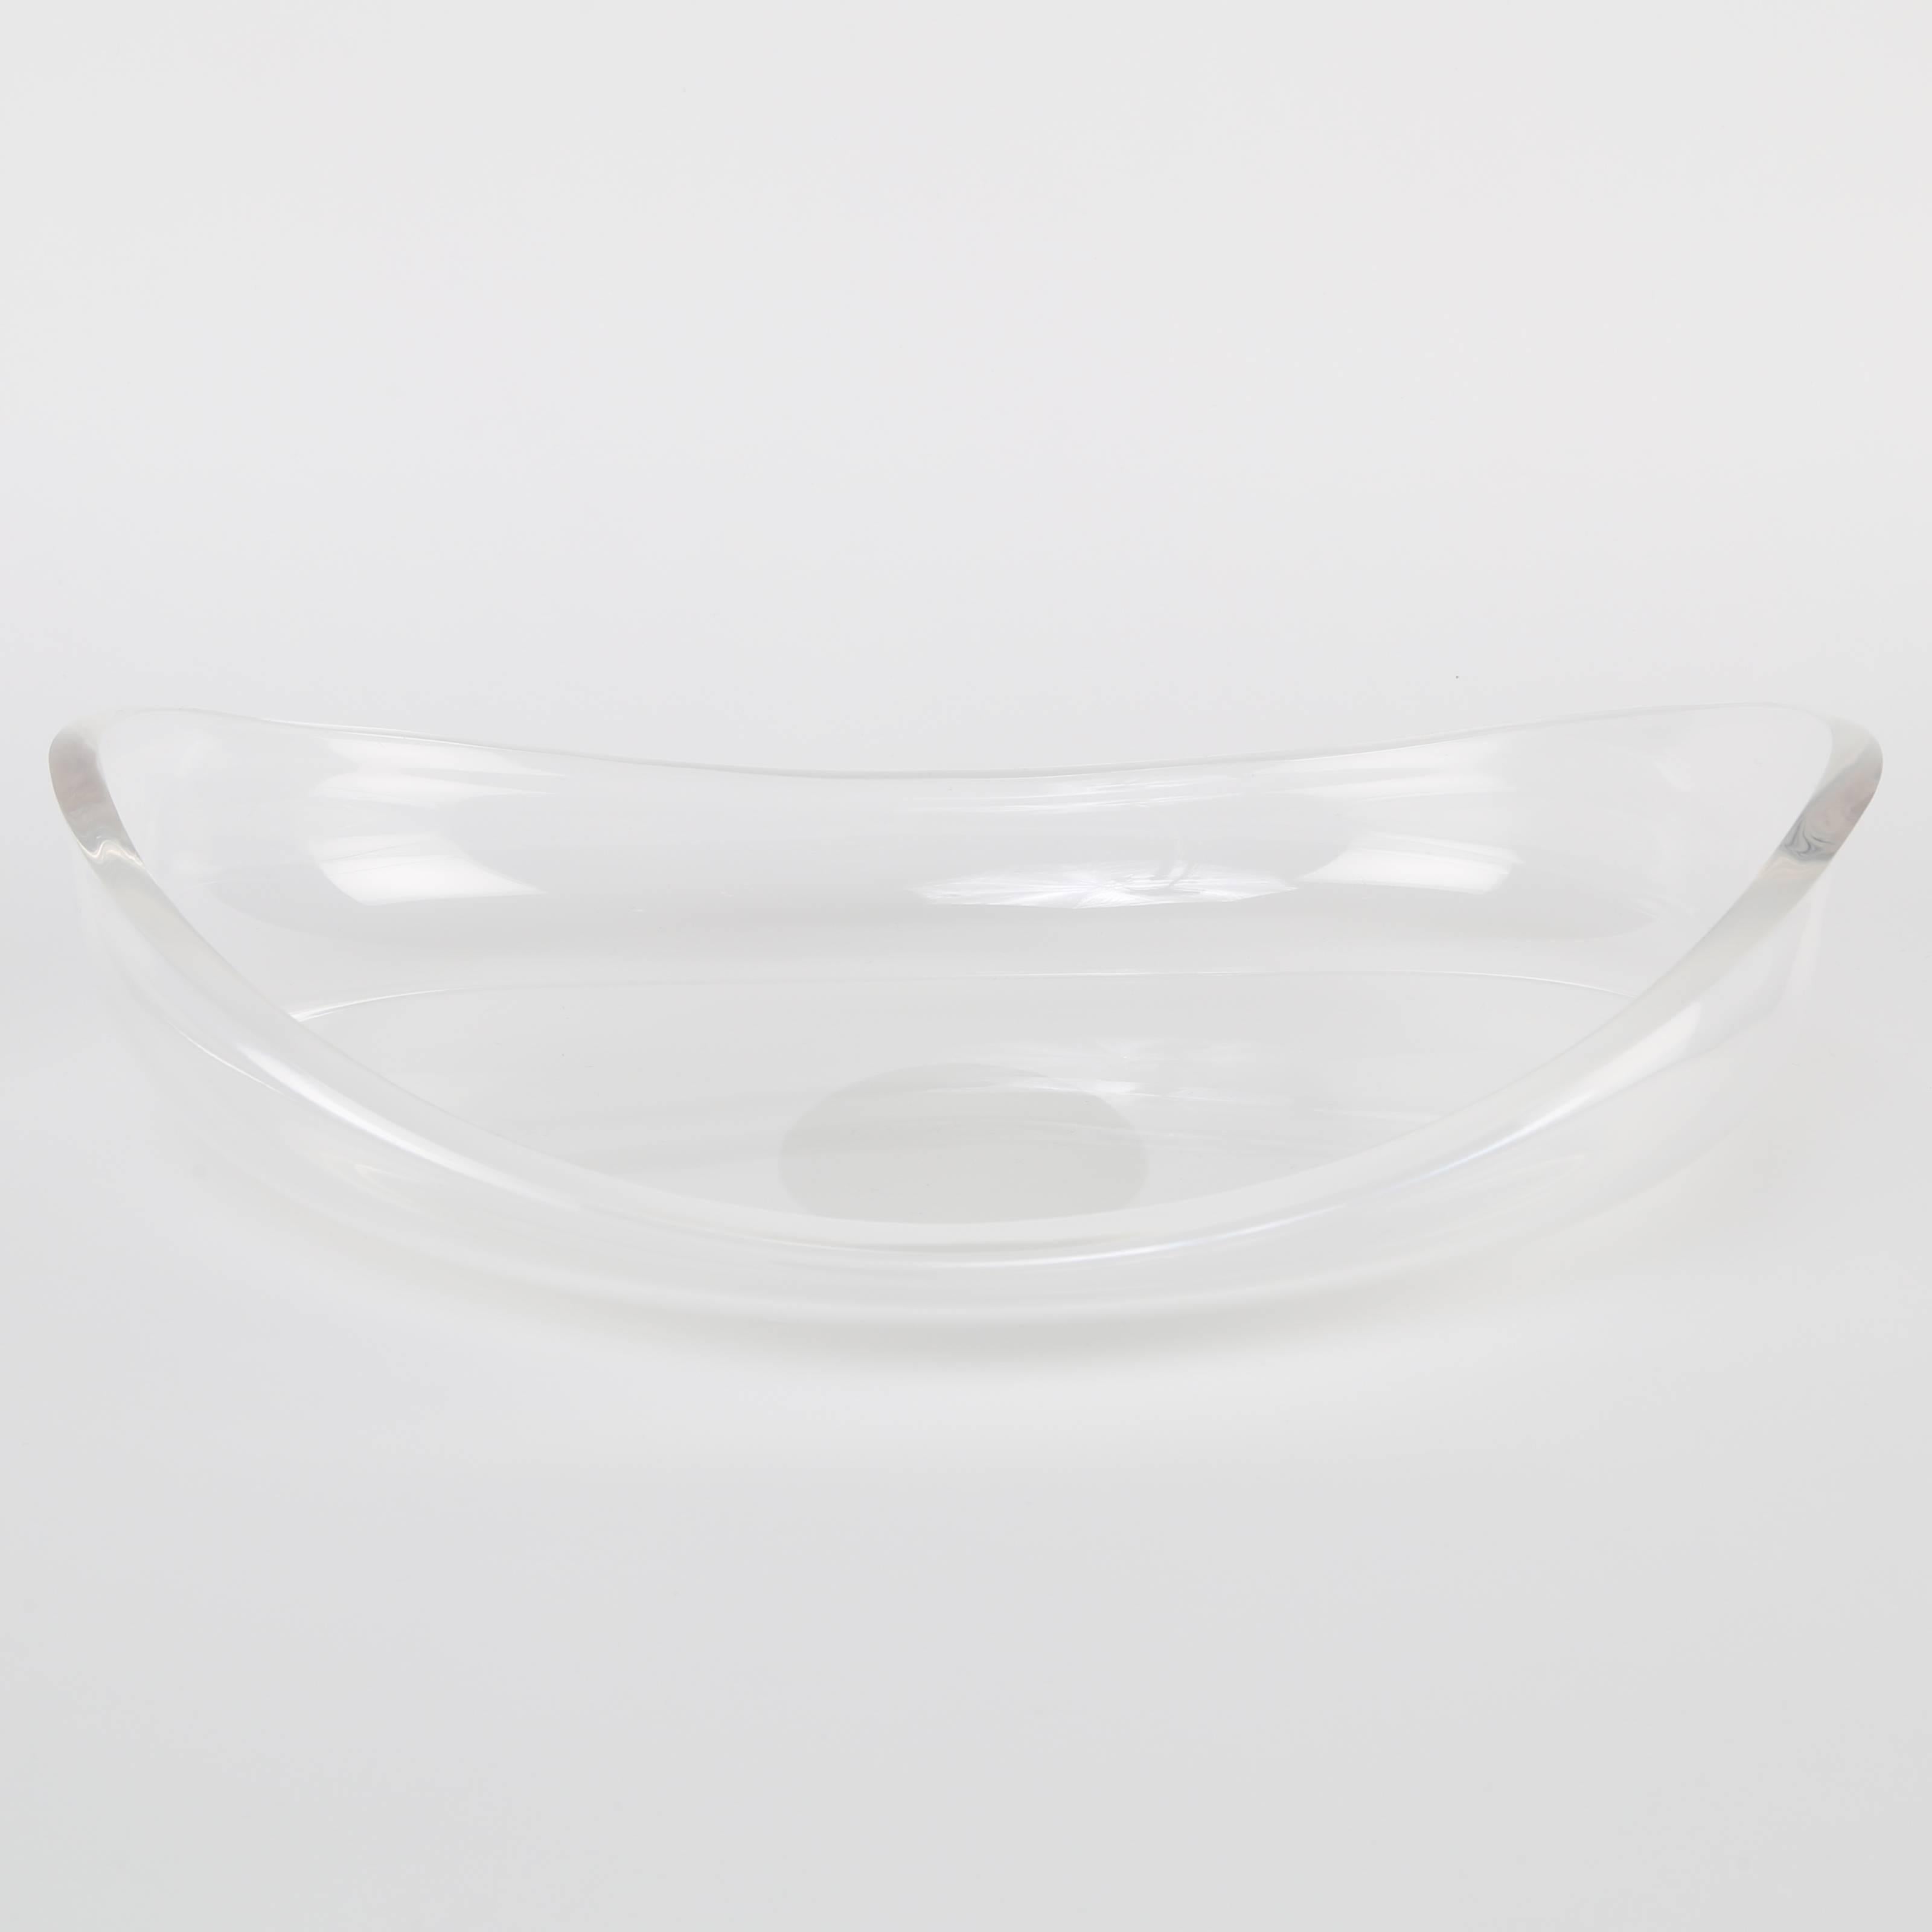 Acrylic Collection of Three Lucite Centerpiece Bowls, Circa 1970s For Sale